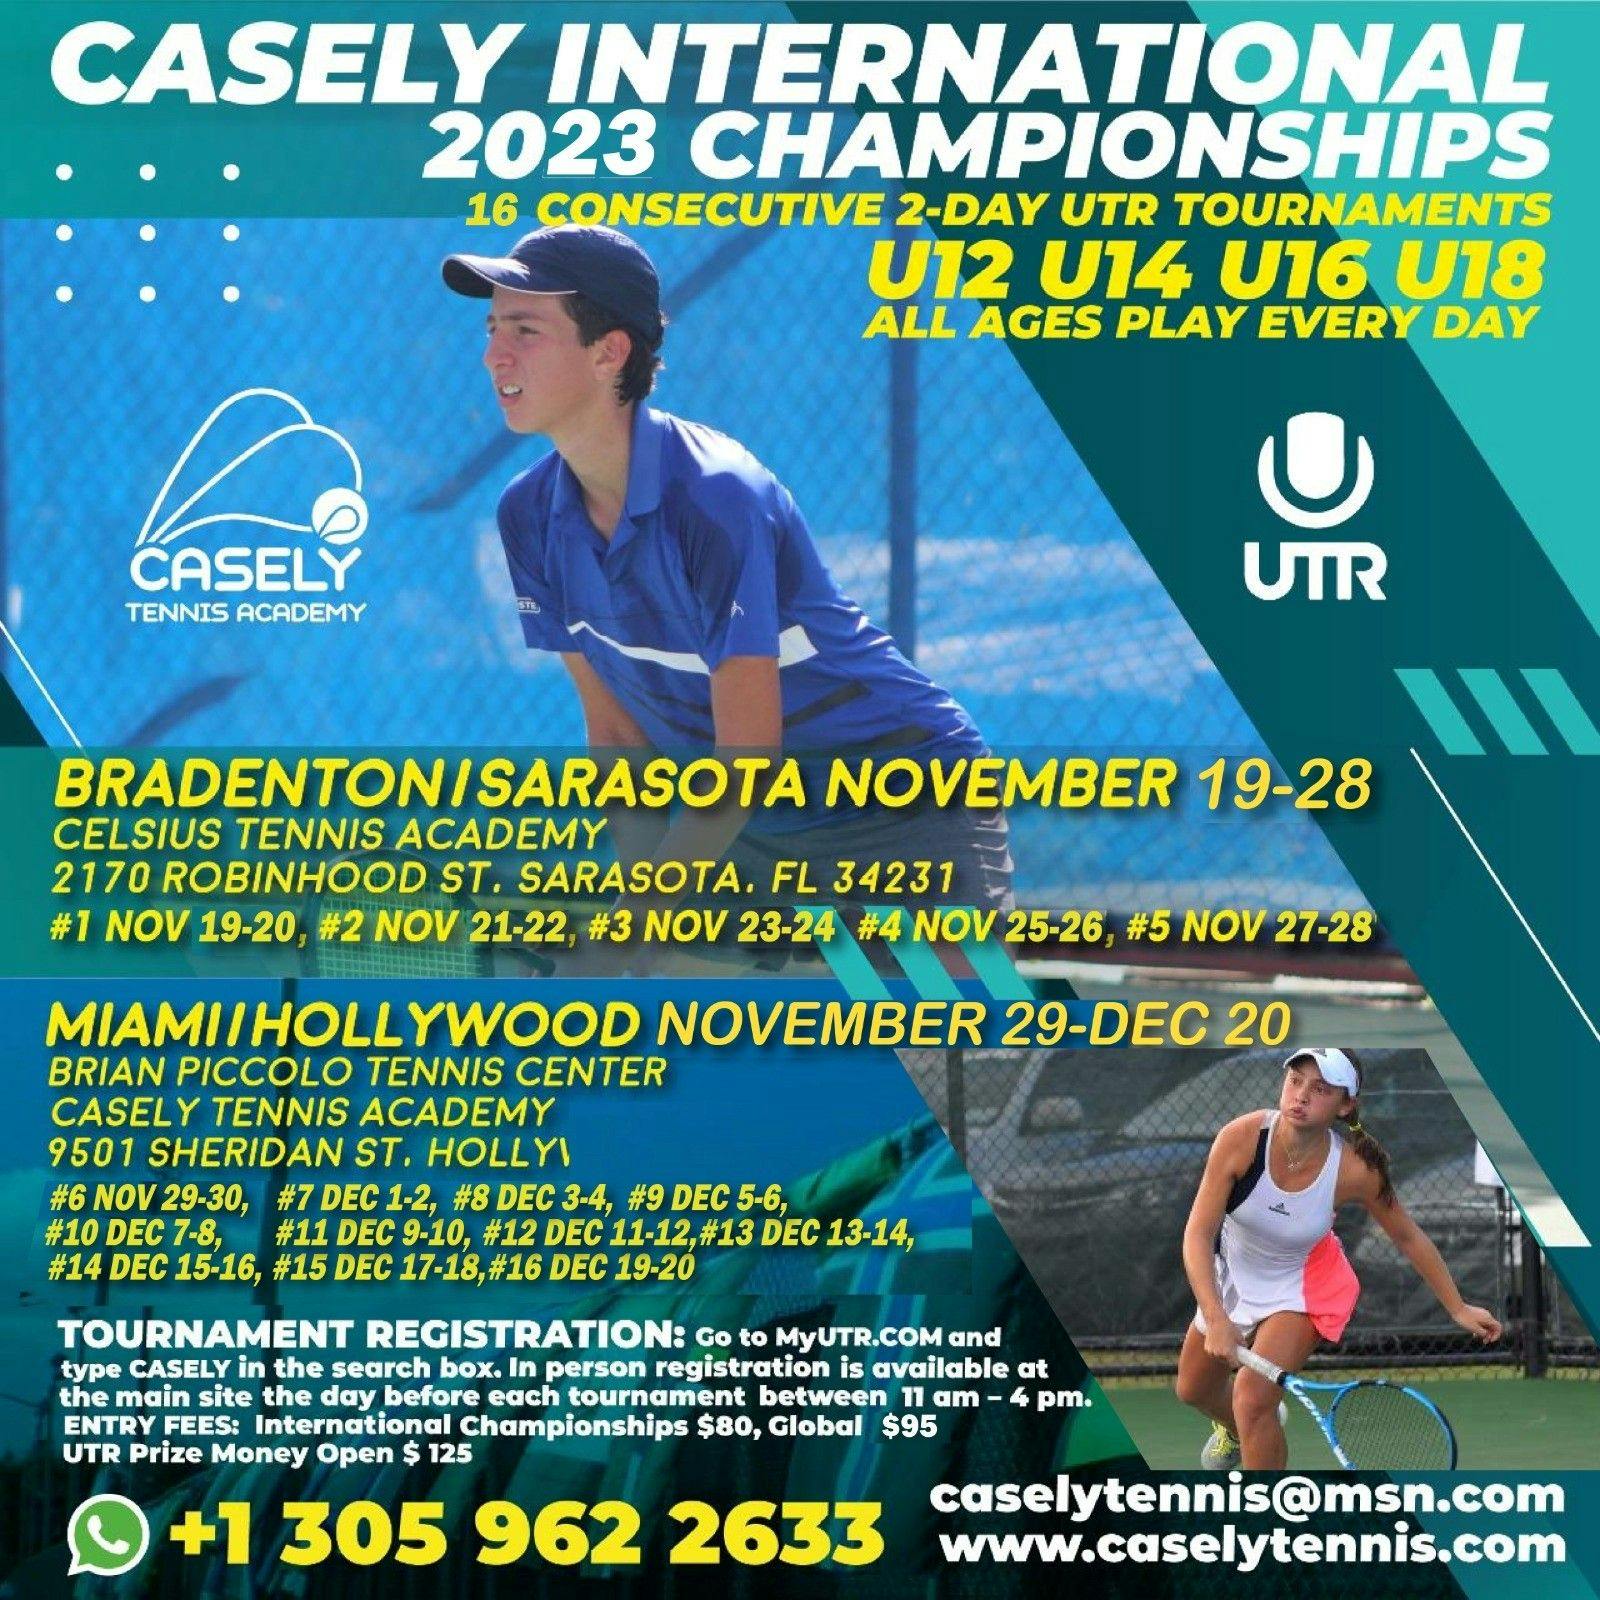 Casely $10,000 Prize Money Tournamentss